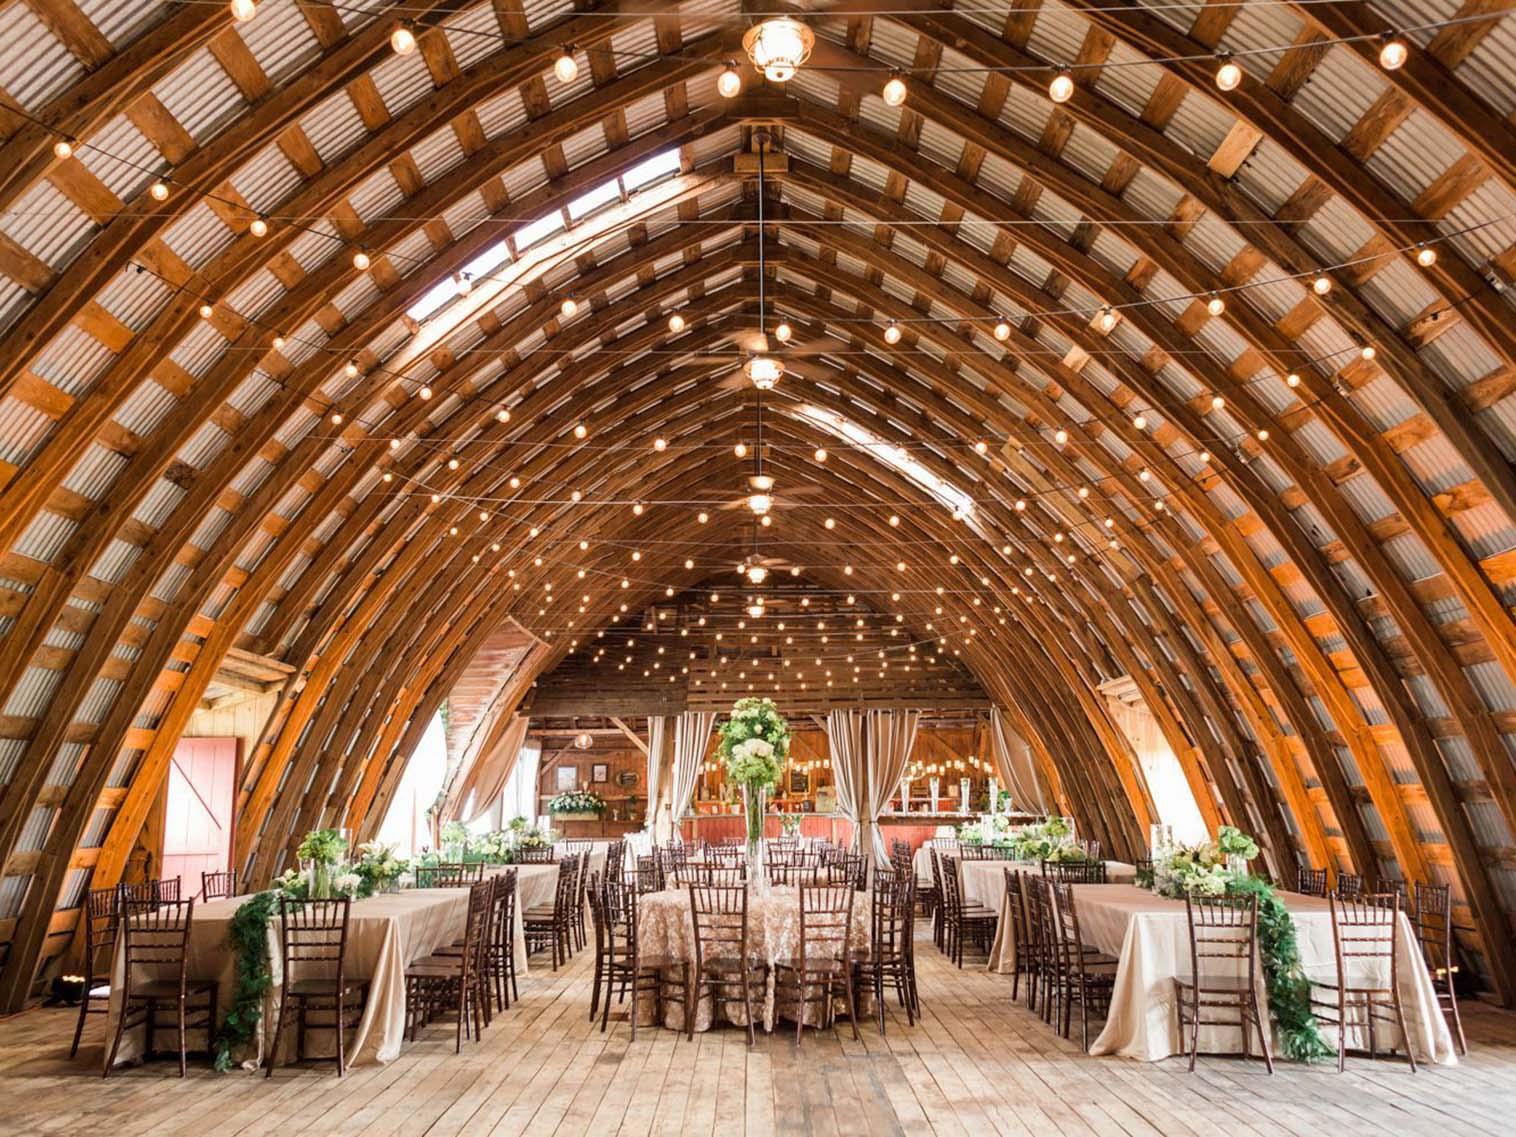 Barn wedding in Upstate New York with white tablecloths and wooden chairs